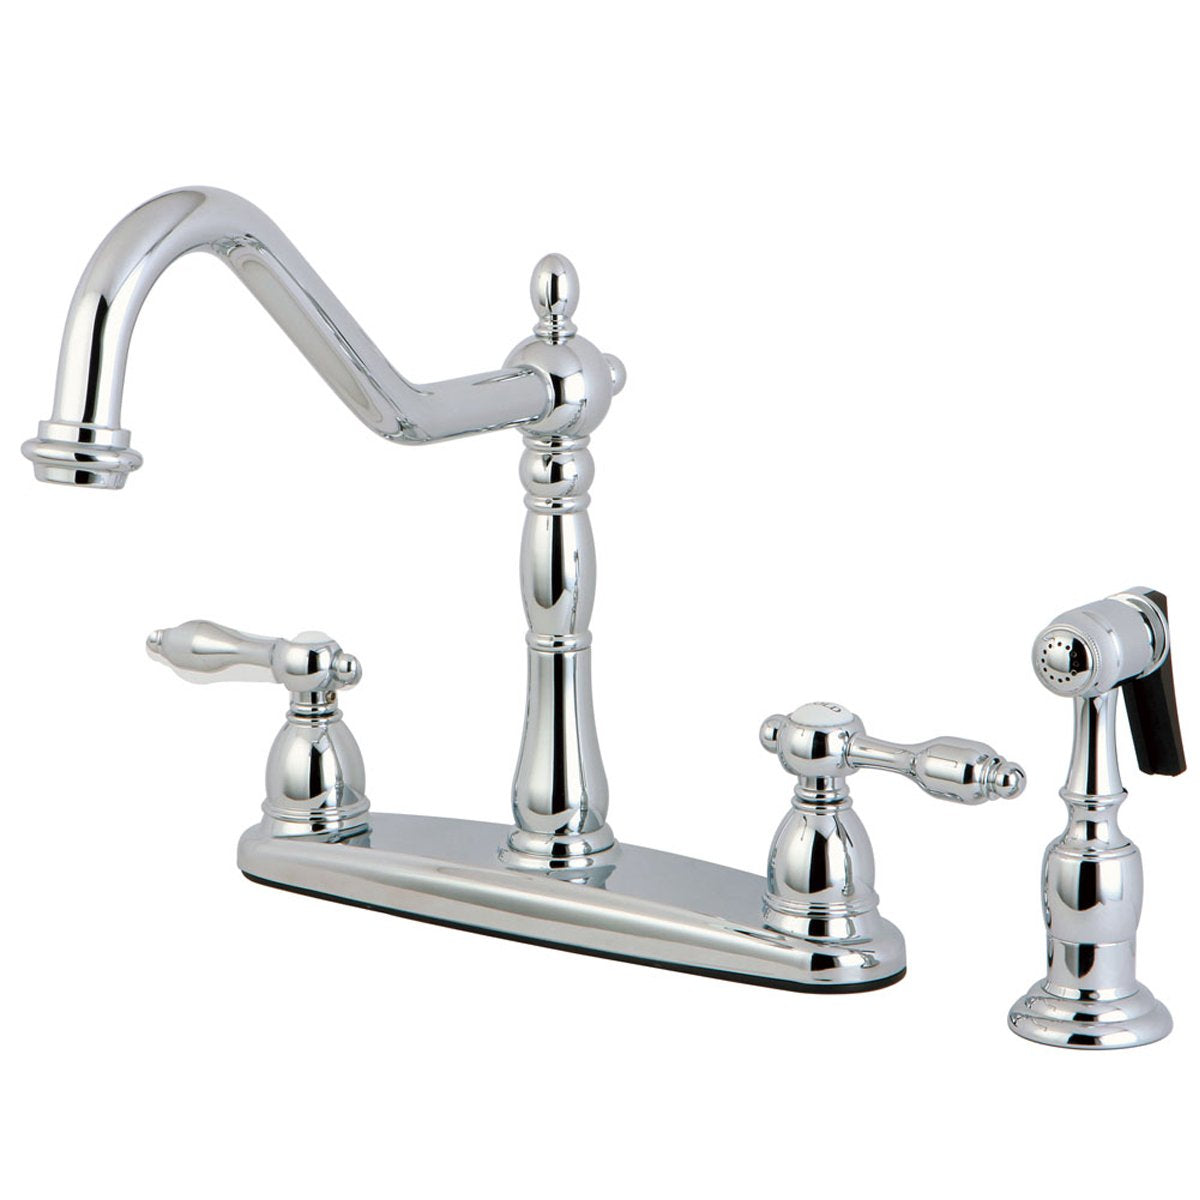 Kingston Brass Tudor 8" Center Kitchen Faucet with Brass Sprayer-Kitchen Faucets-Free Shipping-Directsinks.